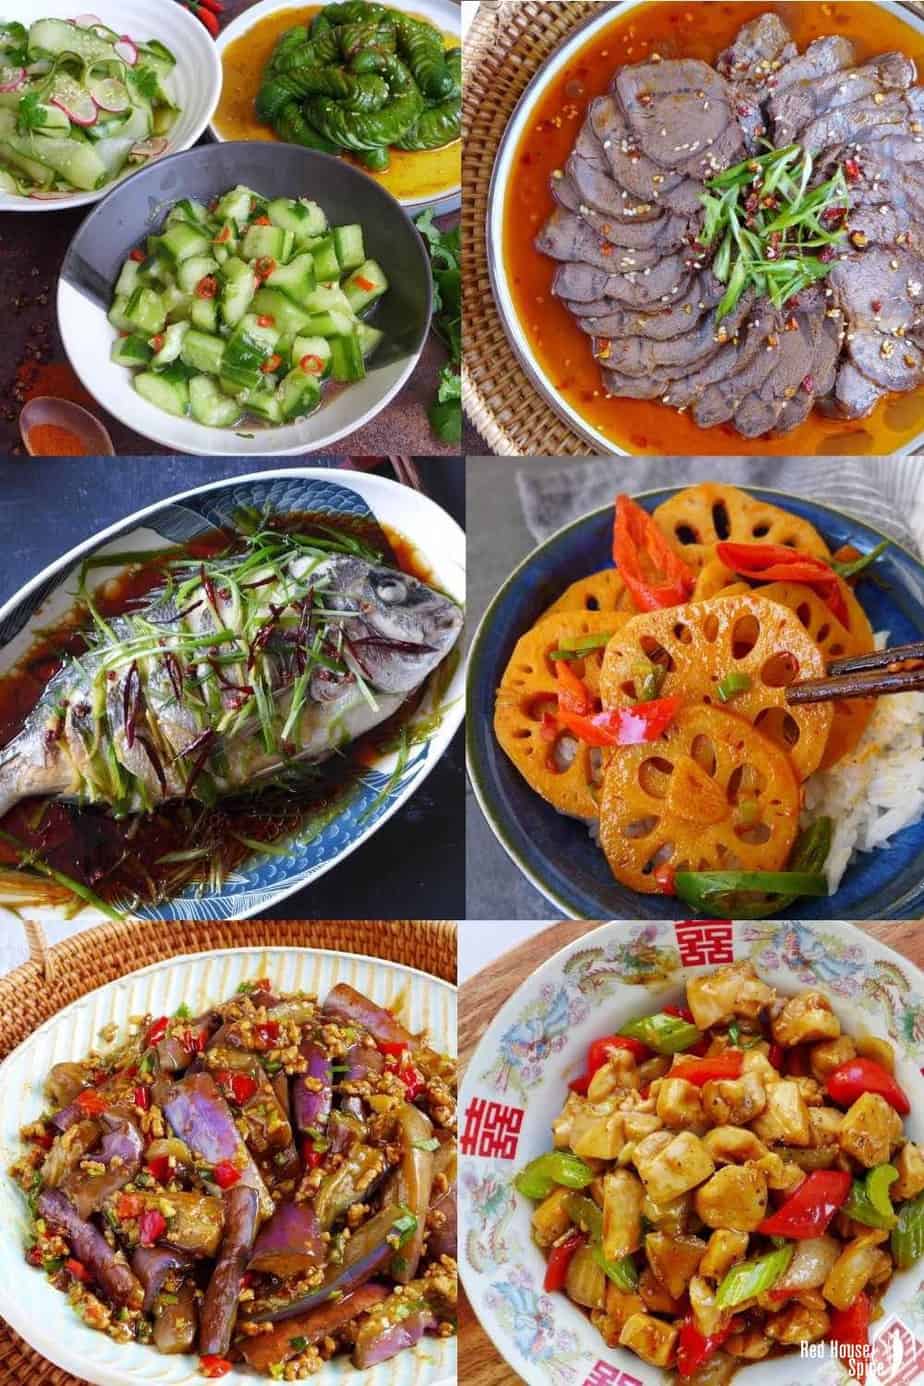 Six classic Chinese dishes: steamed fish, cucumber salad, beef shank appetiser, spicy lotus root, eggplant with garlic sauce & black pepper chicken